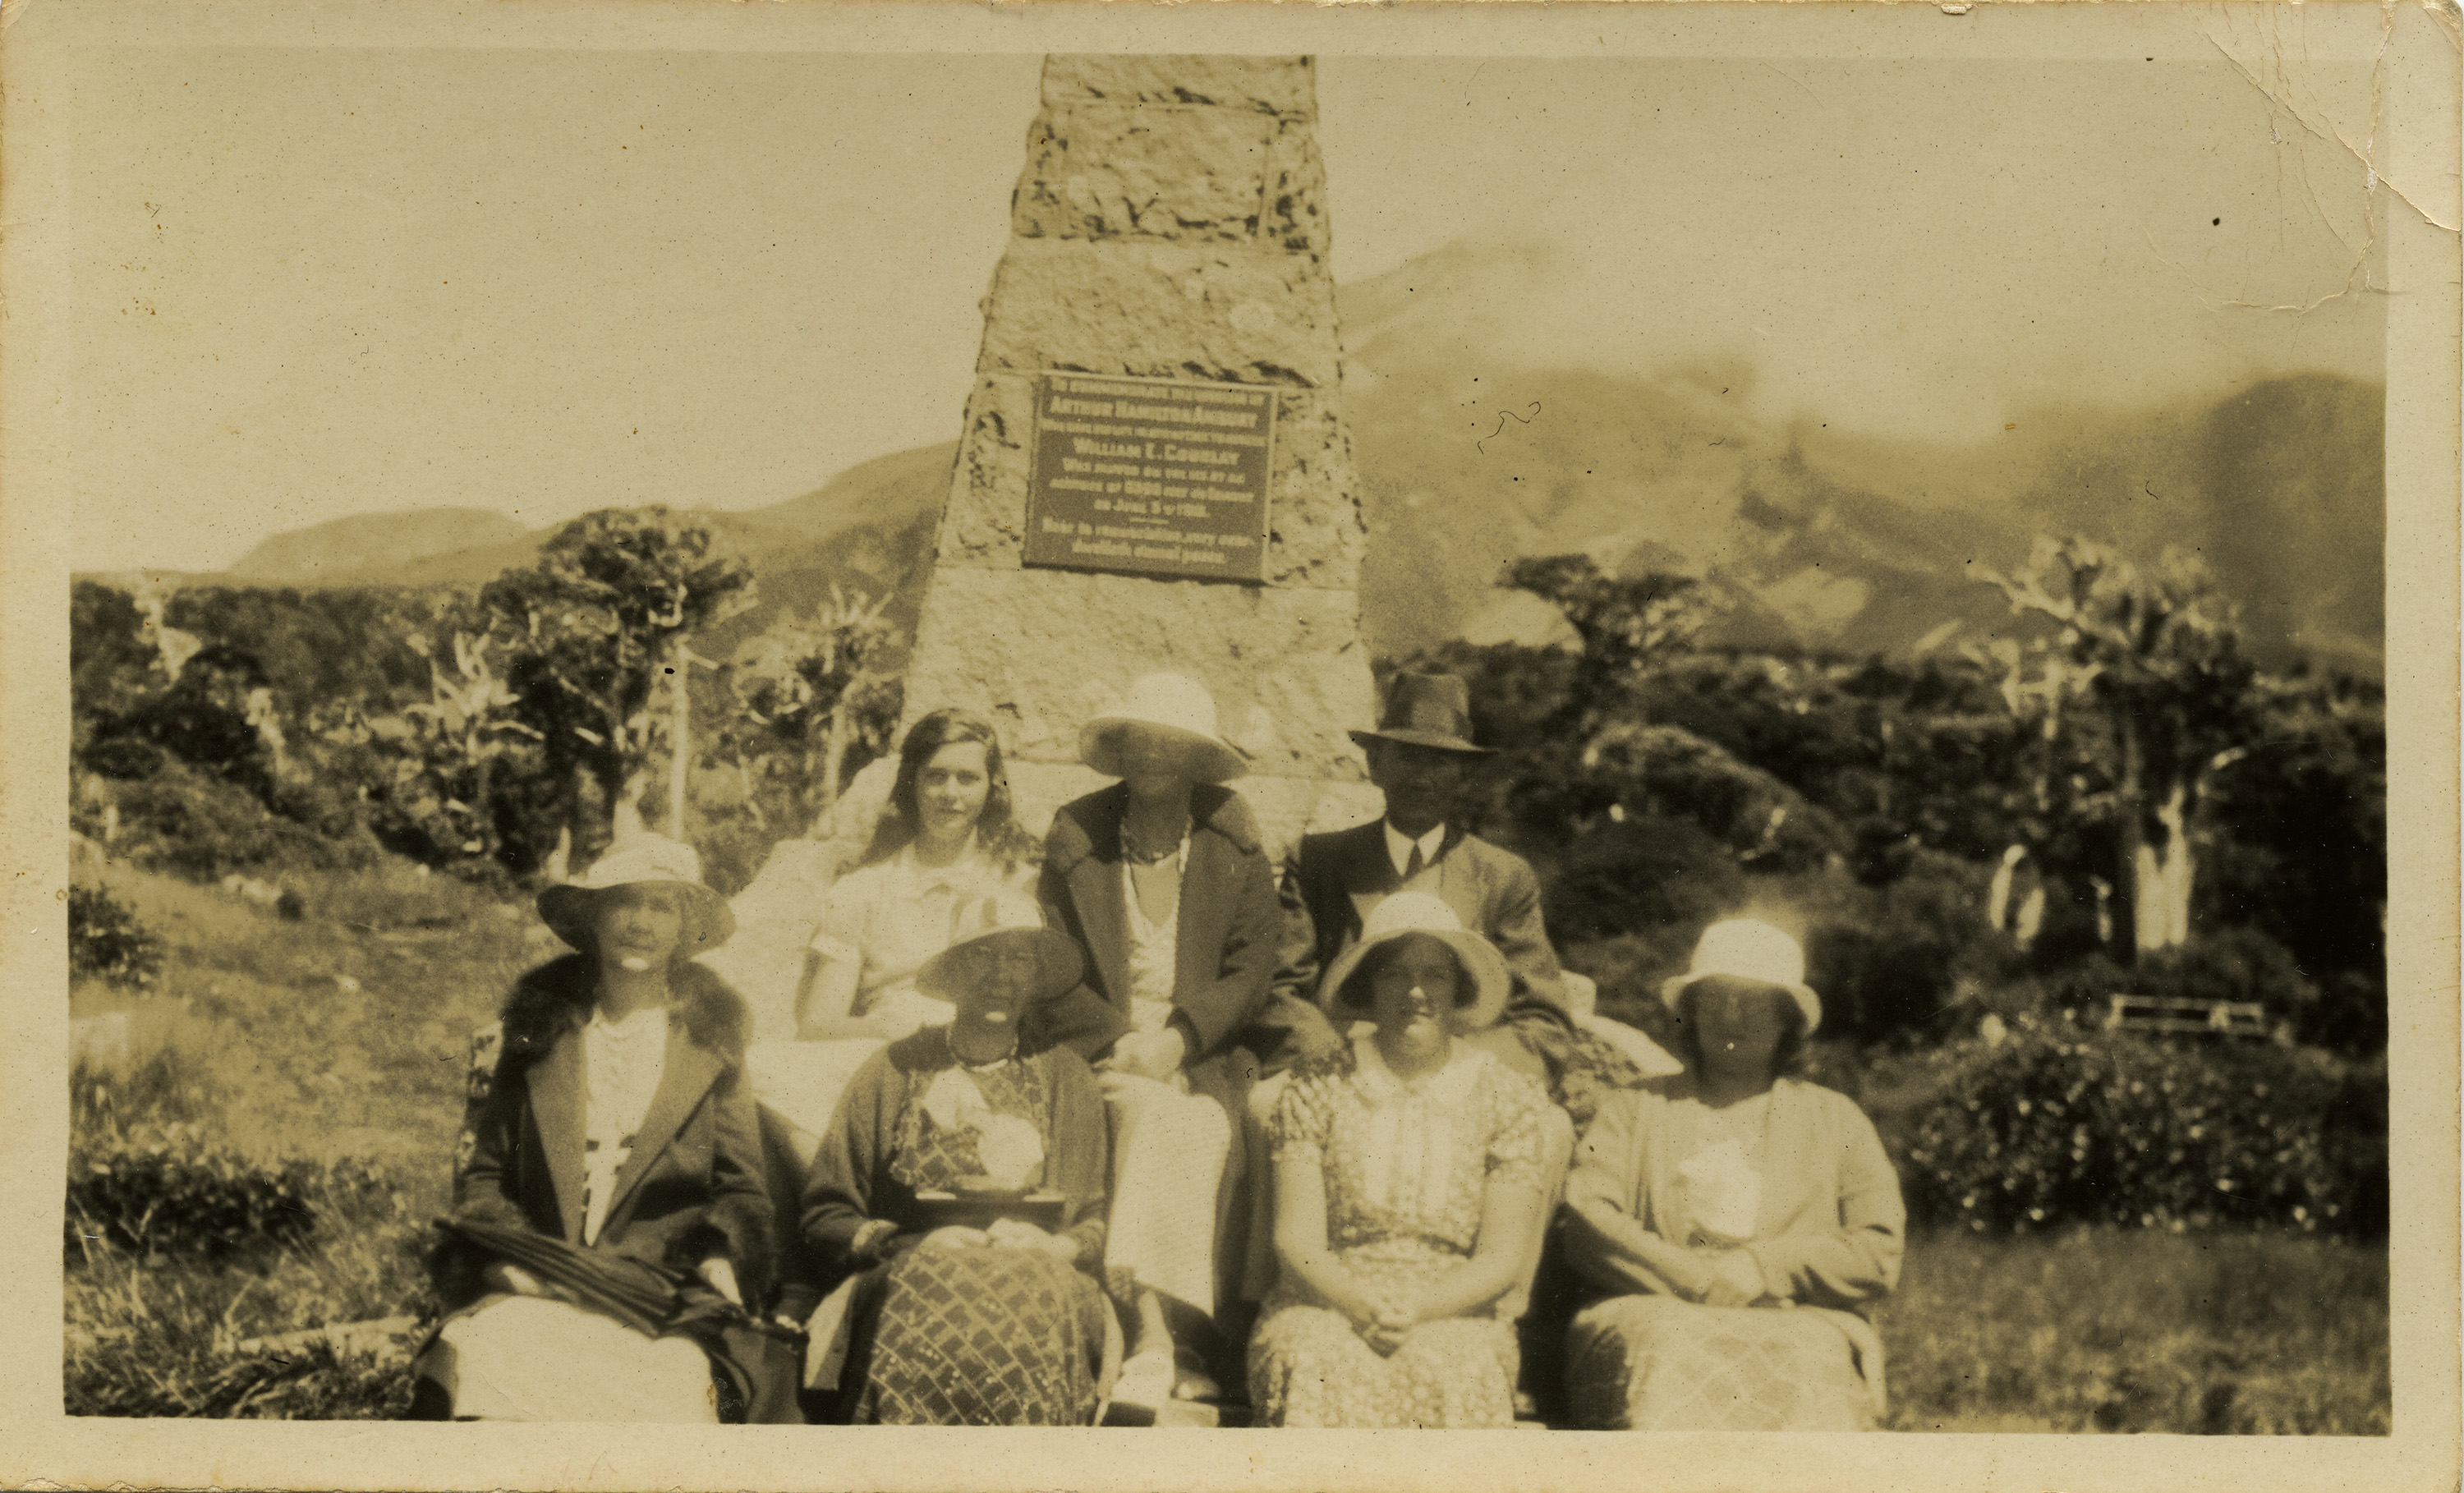 A mountain party at the Ambury Monument on Mount Taranaki, in the years after Arthur’s death. His mother Jessie Gilmour is the second from left in the front row, and his sister Mabel is on the far right.